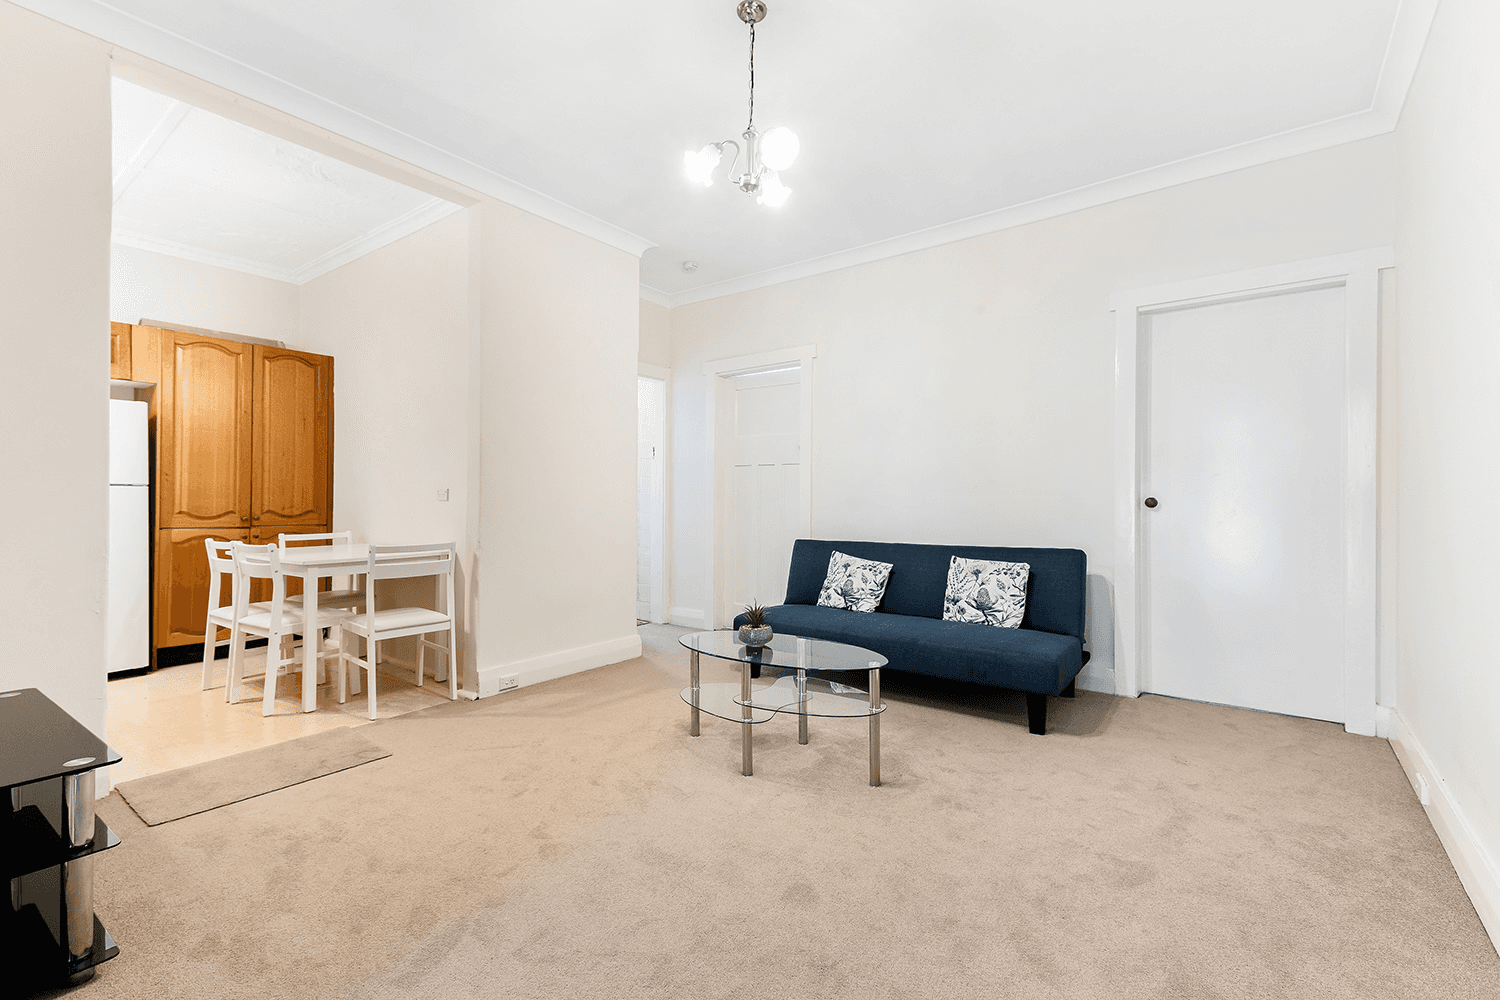 3/680 Old South Head Road, ROSE BAY, NSW 2029